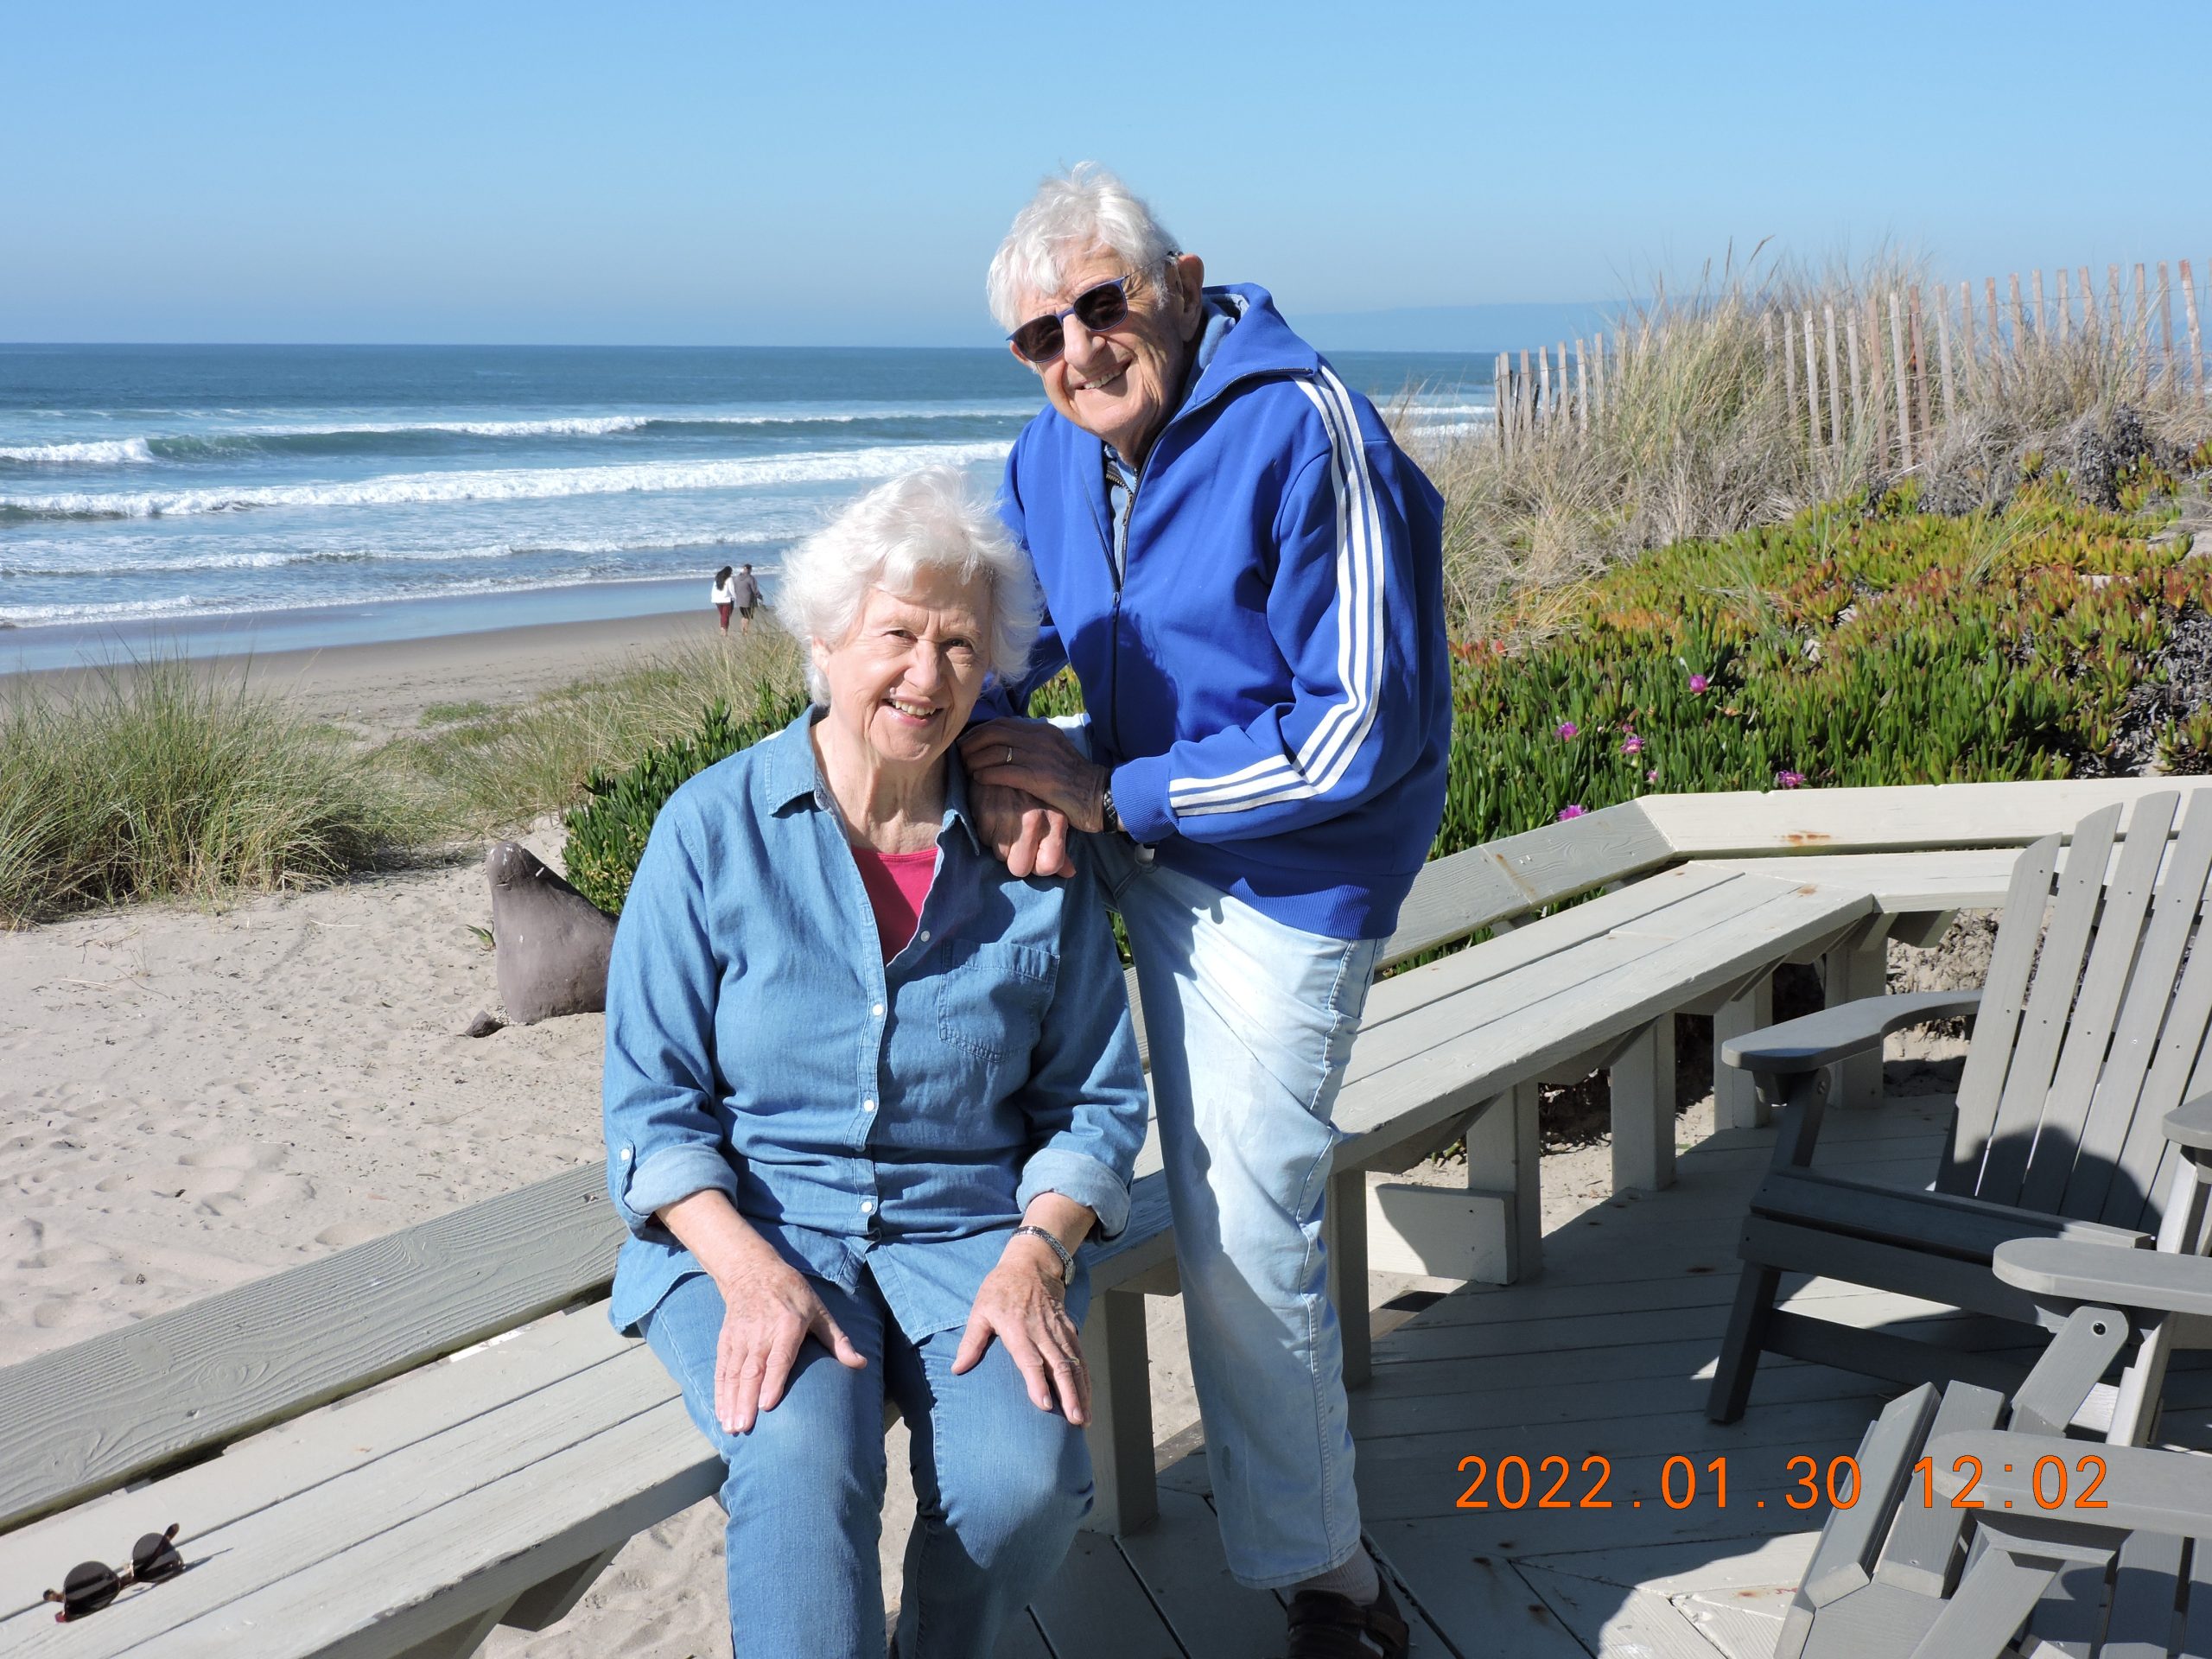 A white man with white hair and sunglasses stands behind a seated white woman with white hair wearing blue by the beach.